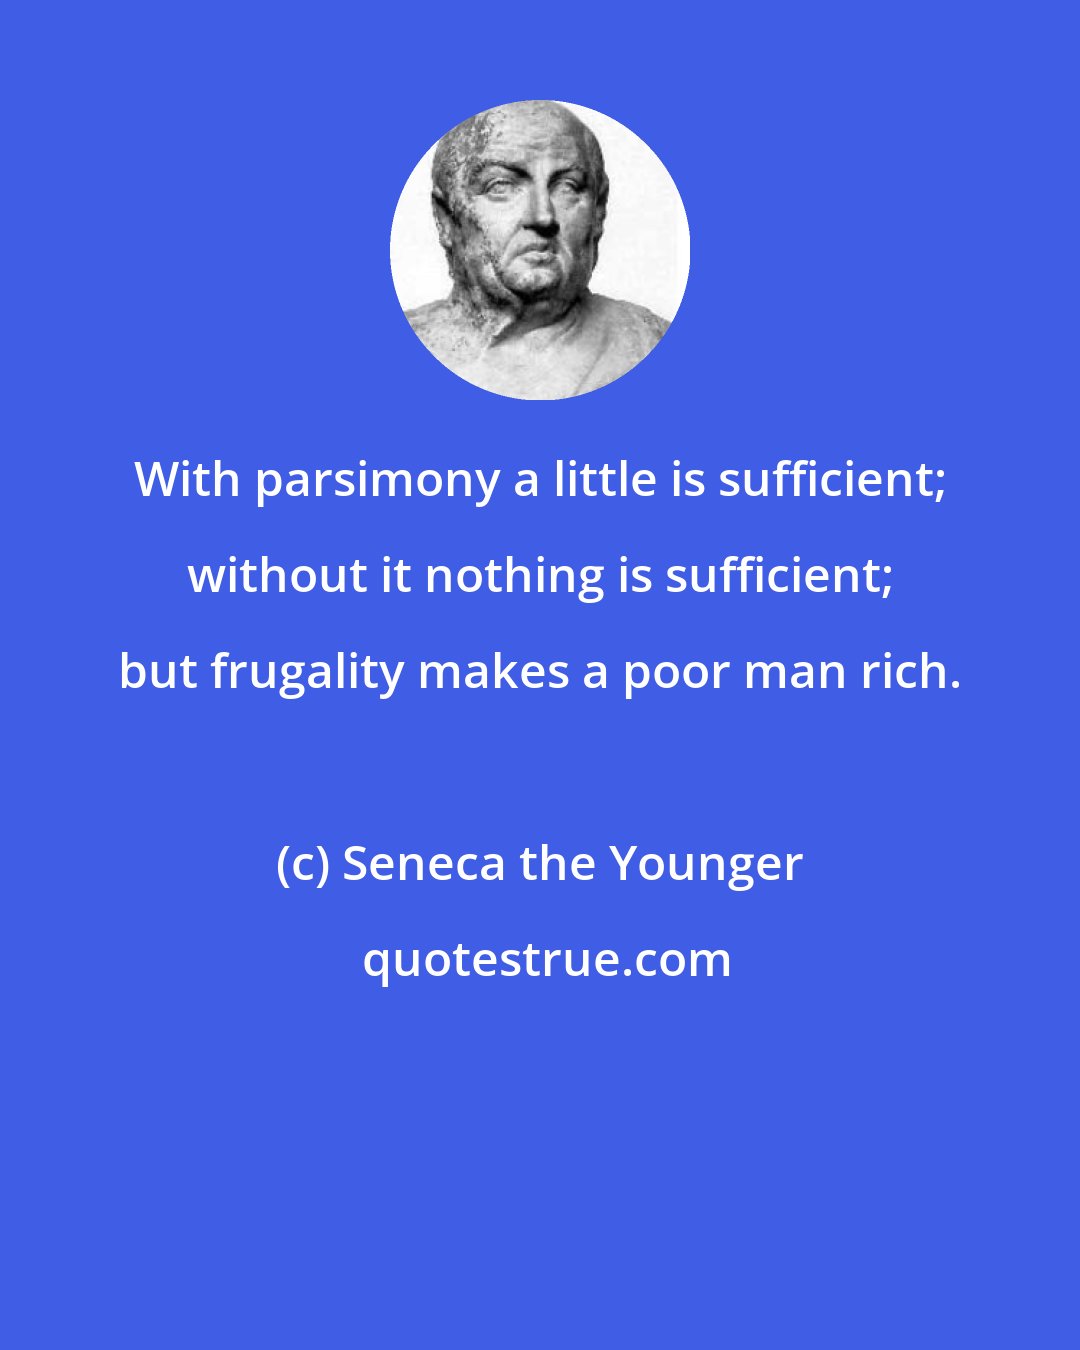 Seneca the Younger: With parsimony a little is sufficient; without it nothing is sufficient; but frugality makes a poor man rich.